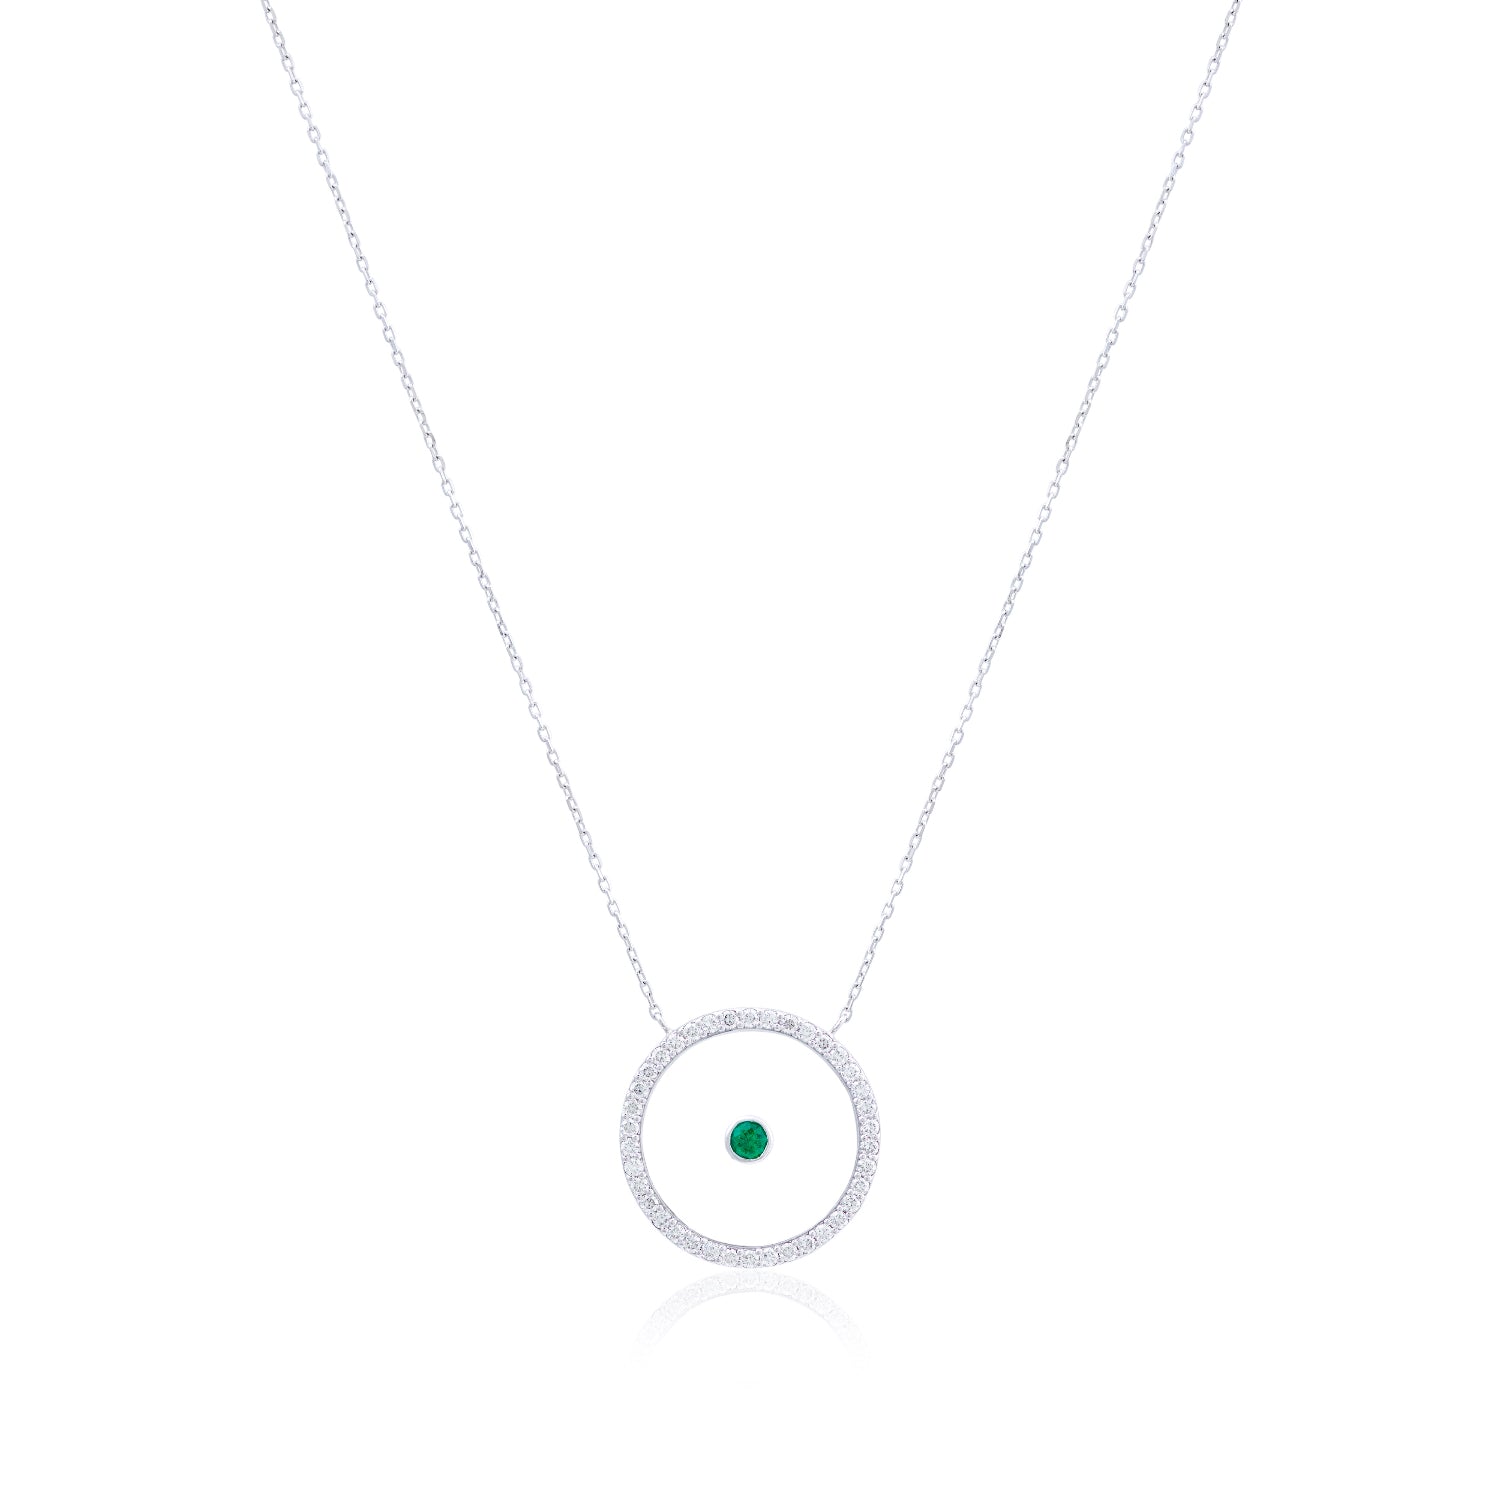 Emerald May Birthstone Necklace in White Gold